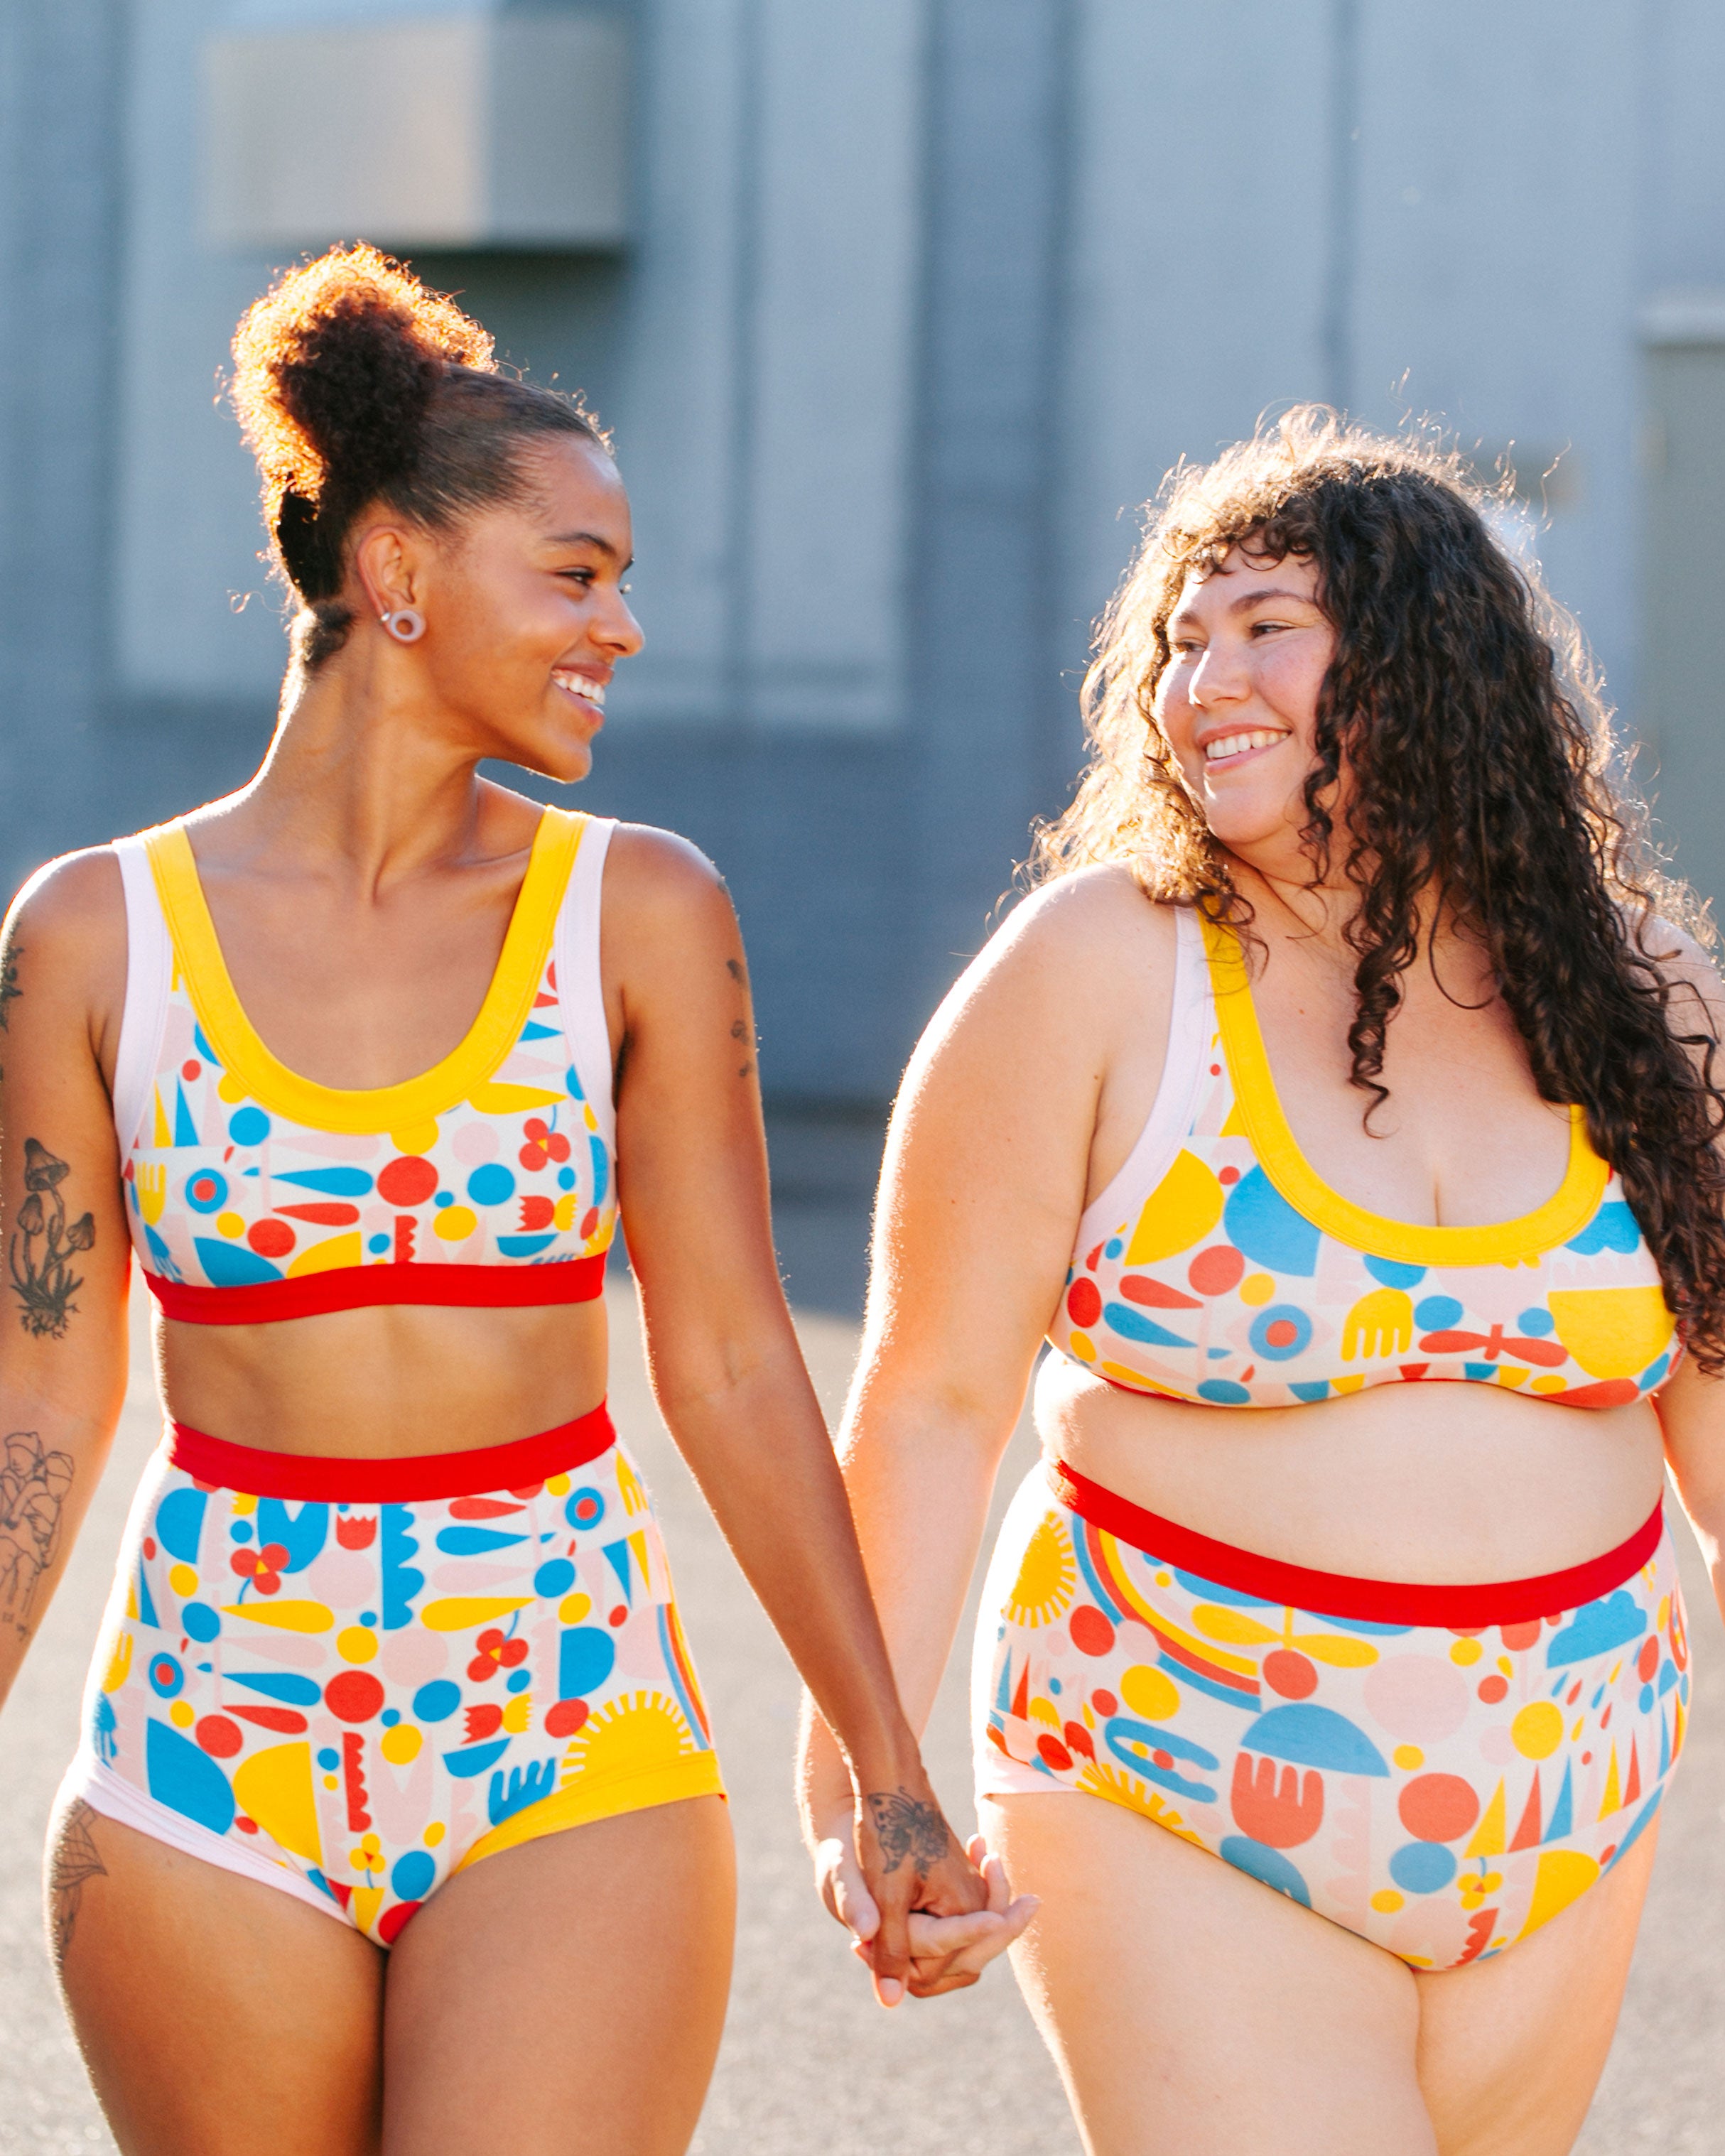 Models holding hands and smiling in the sun wearing sets of Bralettes, Sky Rise and Original style underwear in Balance by Lisa Congdon: geometric shapes in red, blue, yellow, and pink colors.